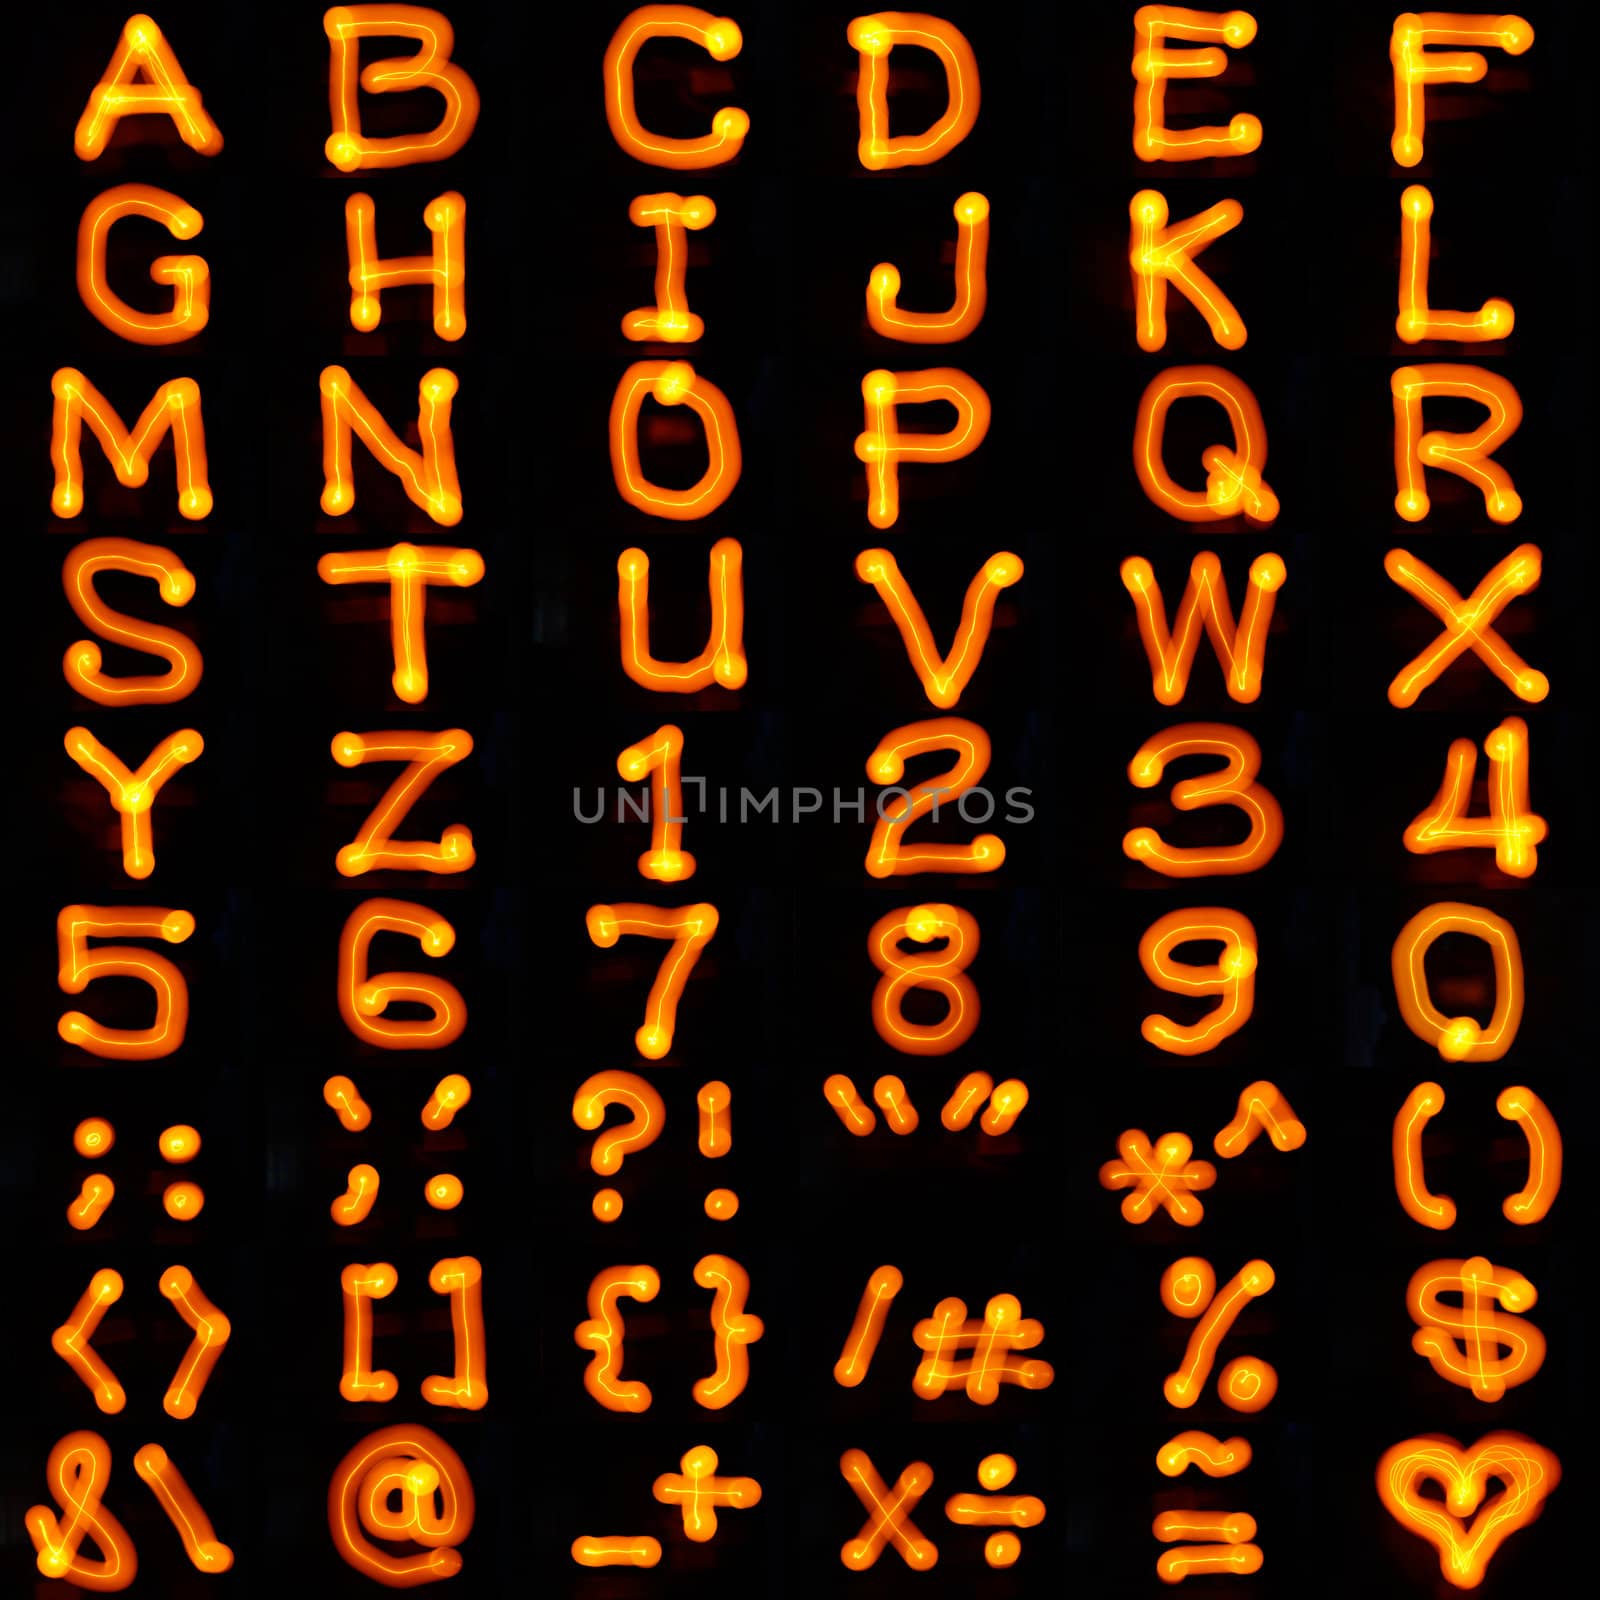 Light painting photo of english alphabet characters and symbols.